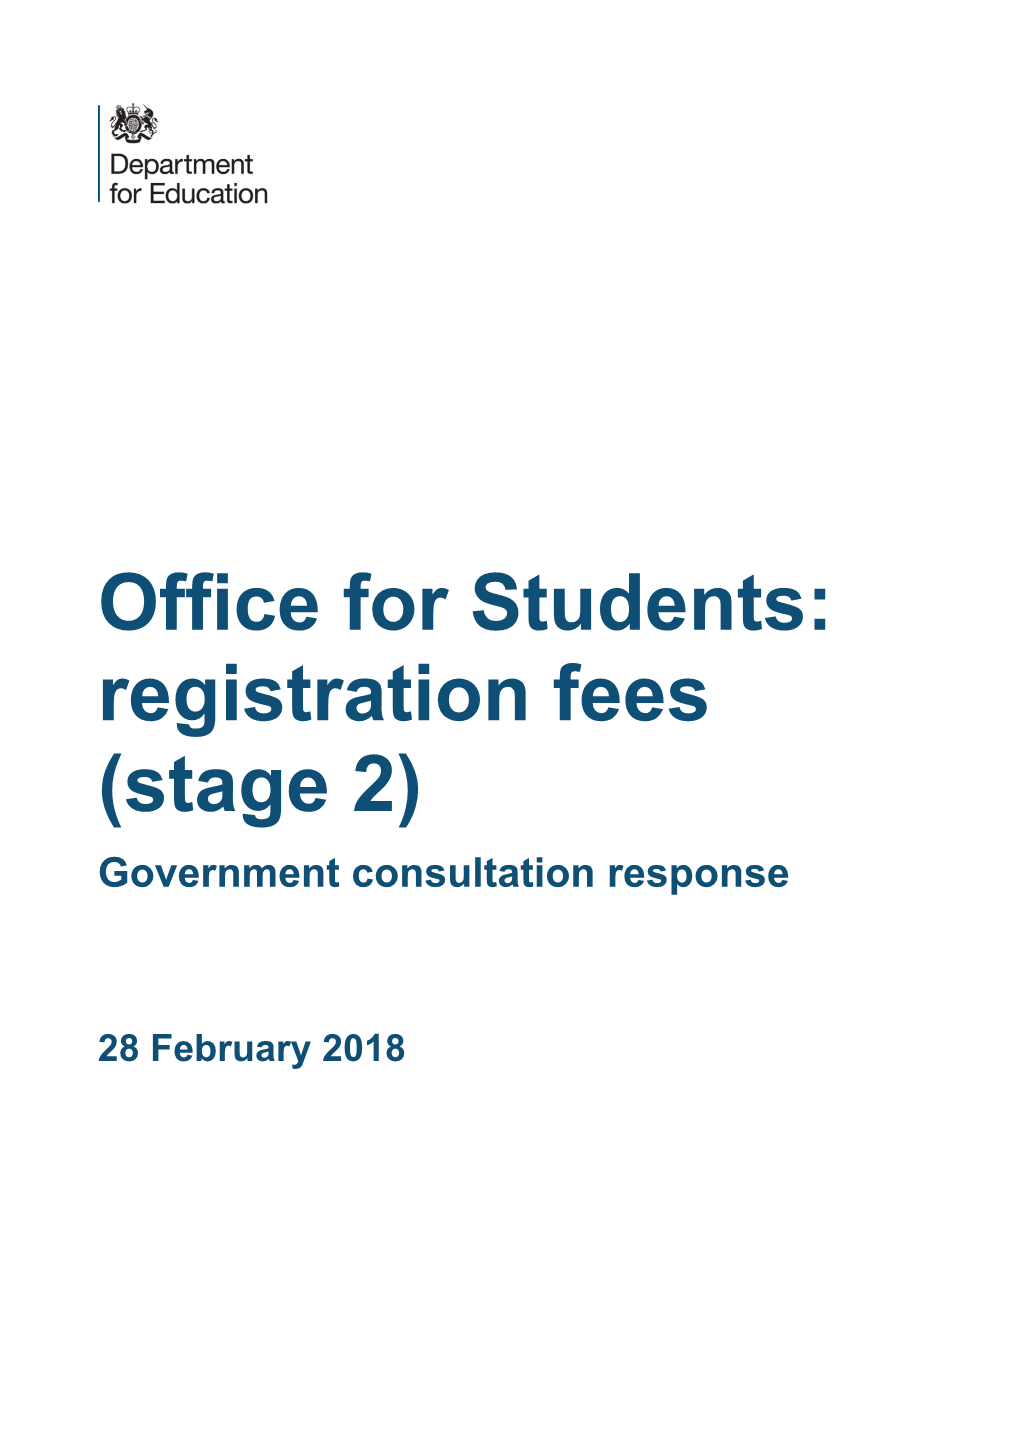 Office for Students: Registration Fees (Stage 2) Government Consultation Response